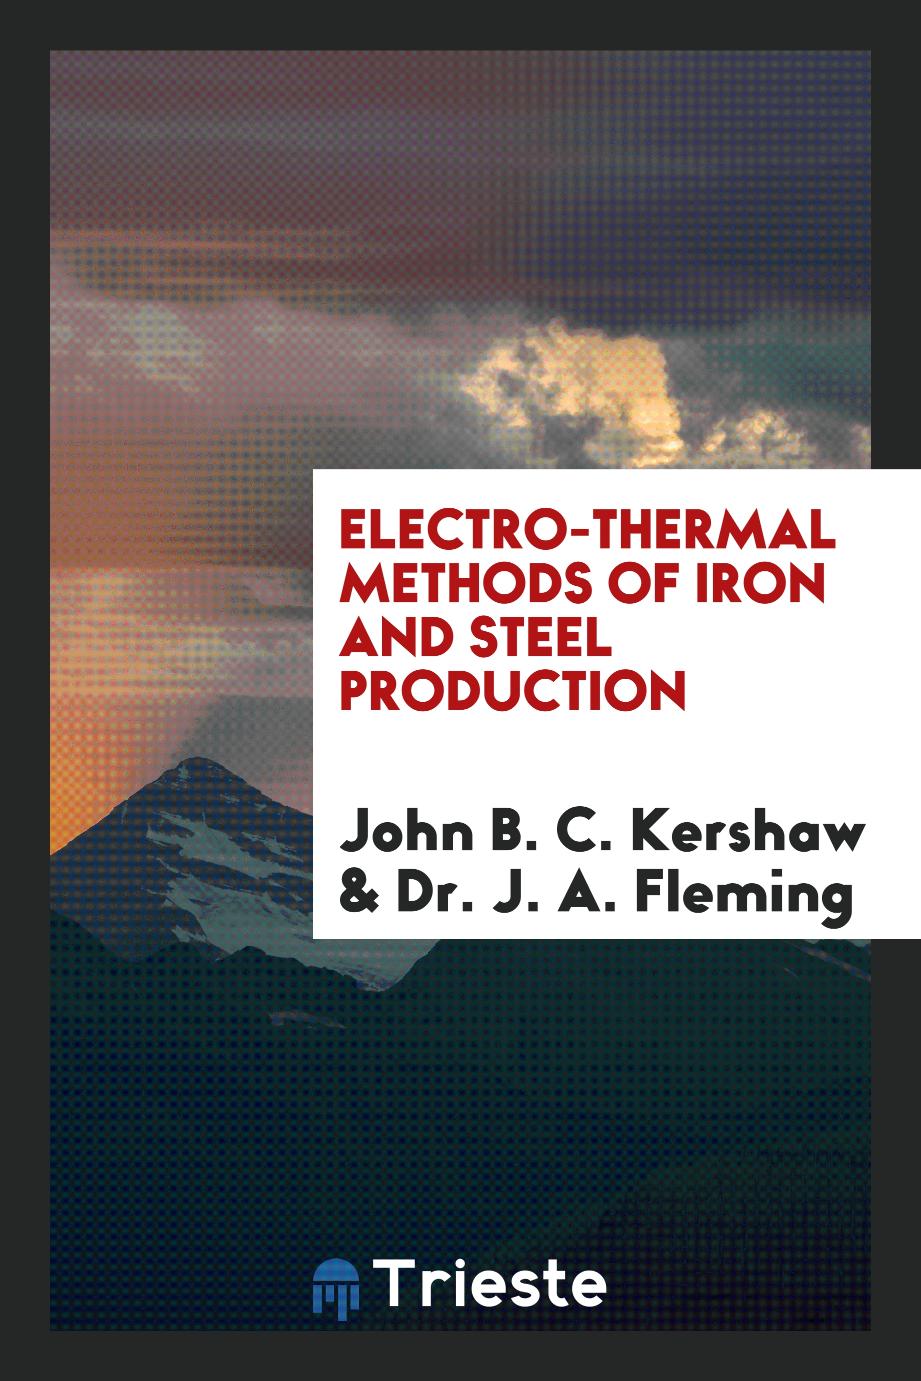 John B. C. Kershaw, Dr. J. A. Fleming - Electro-Thermal Methods of Iron and Steel Production